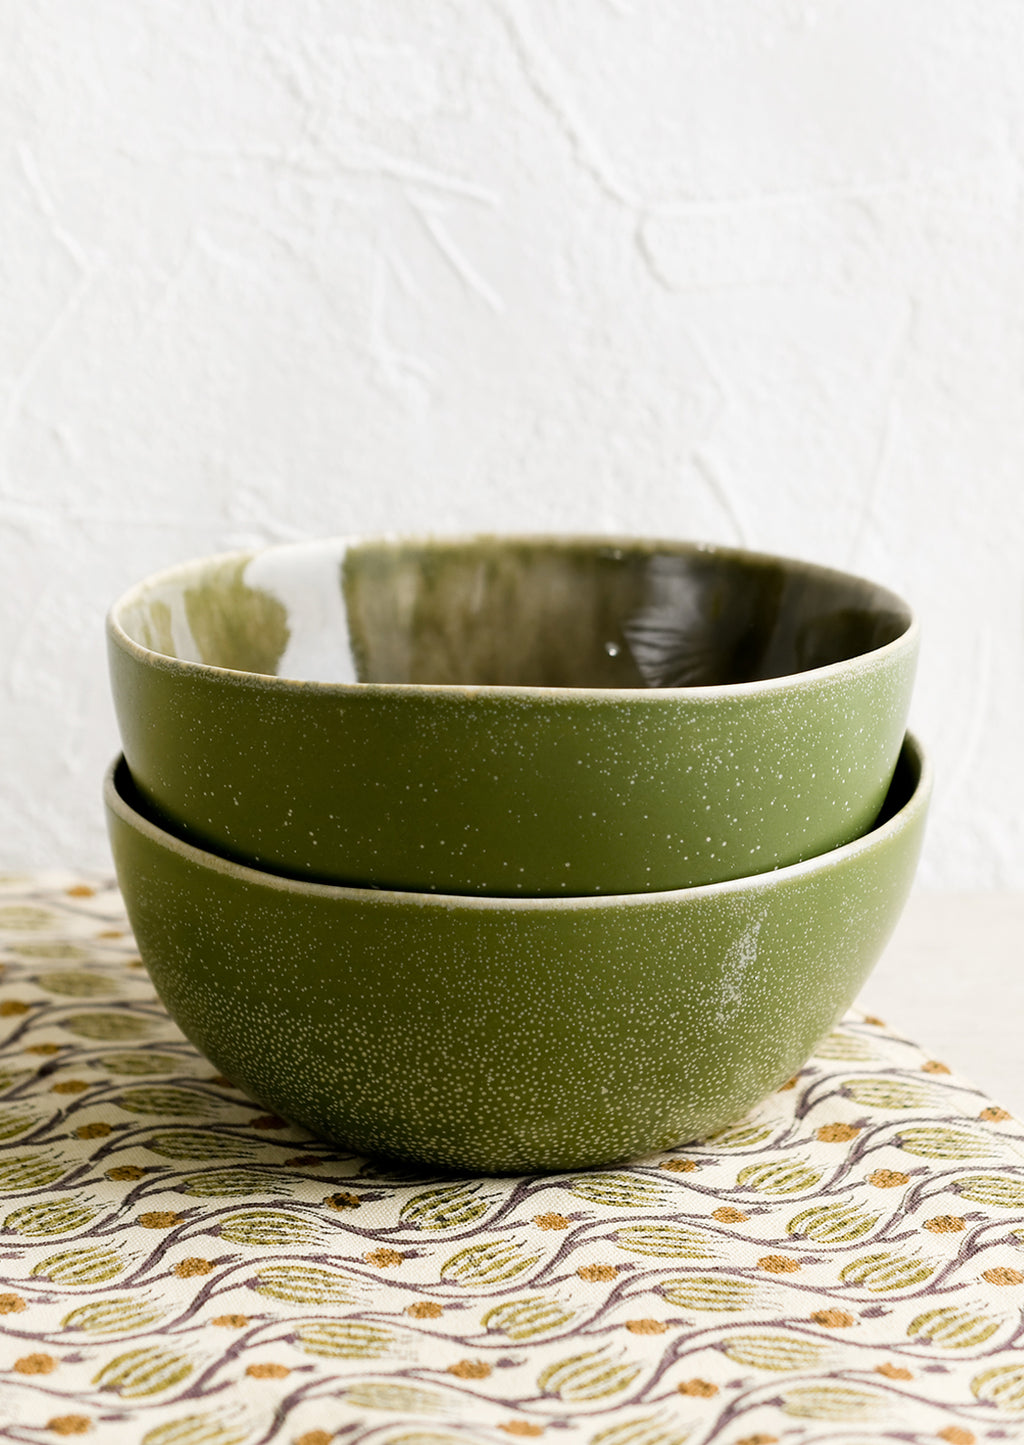 1: Two stacked olive green ceramic bowls.